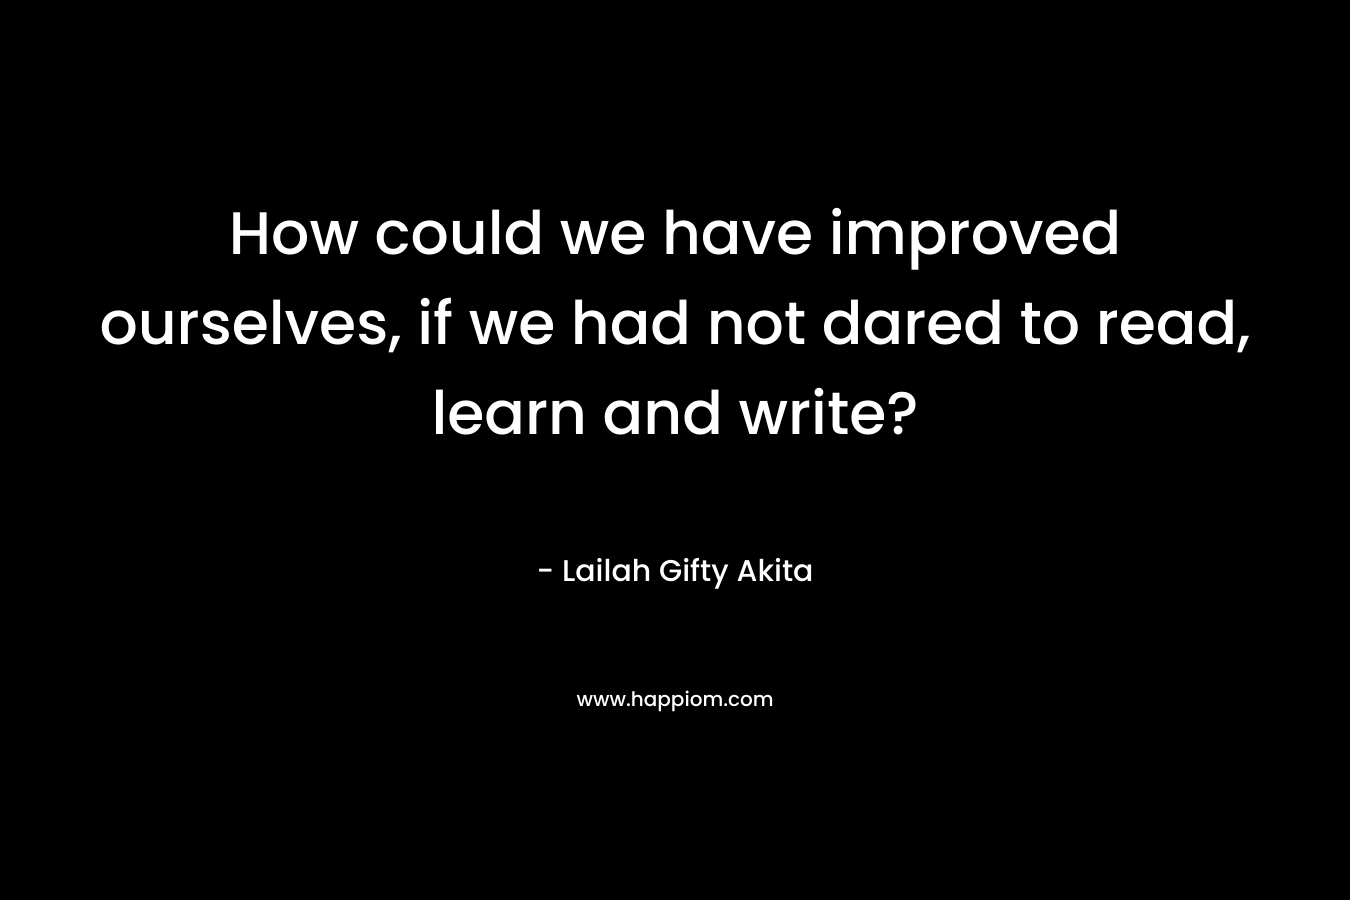 How could we have improved ourselves, if we had not dared to read, learn and write?